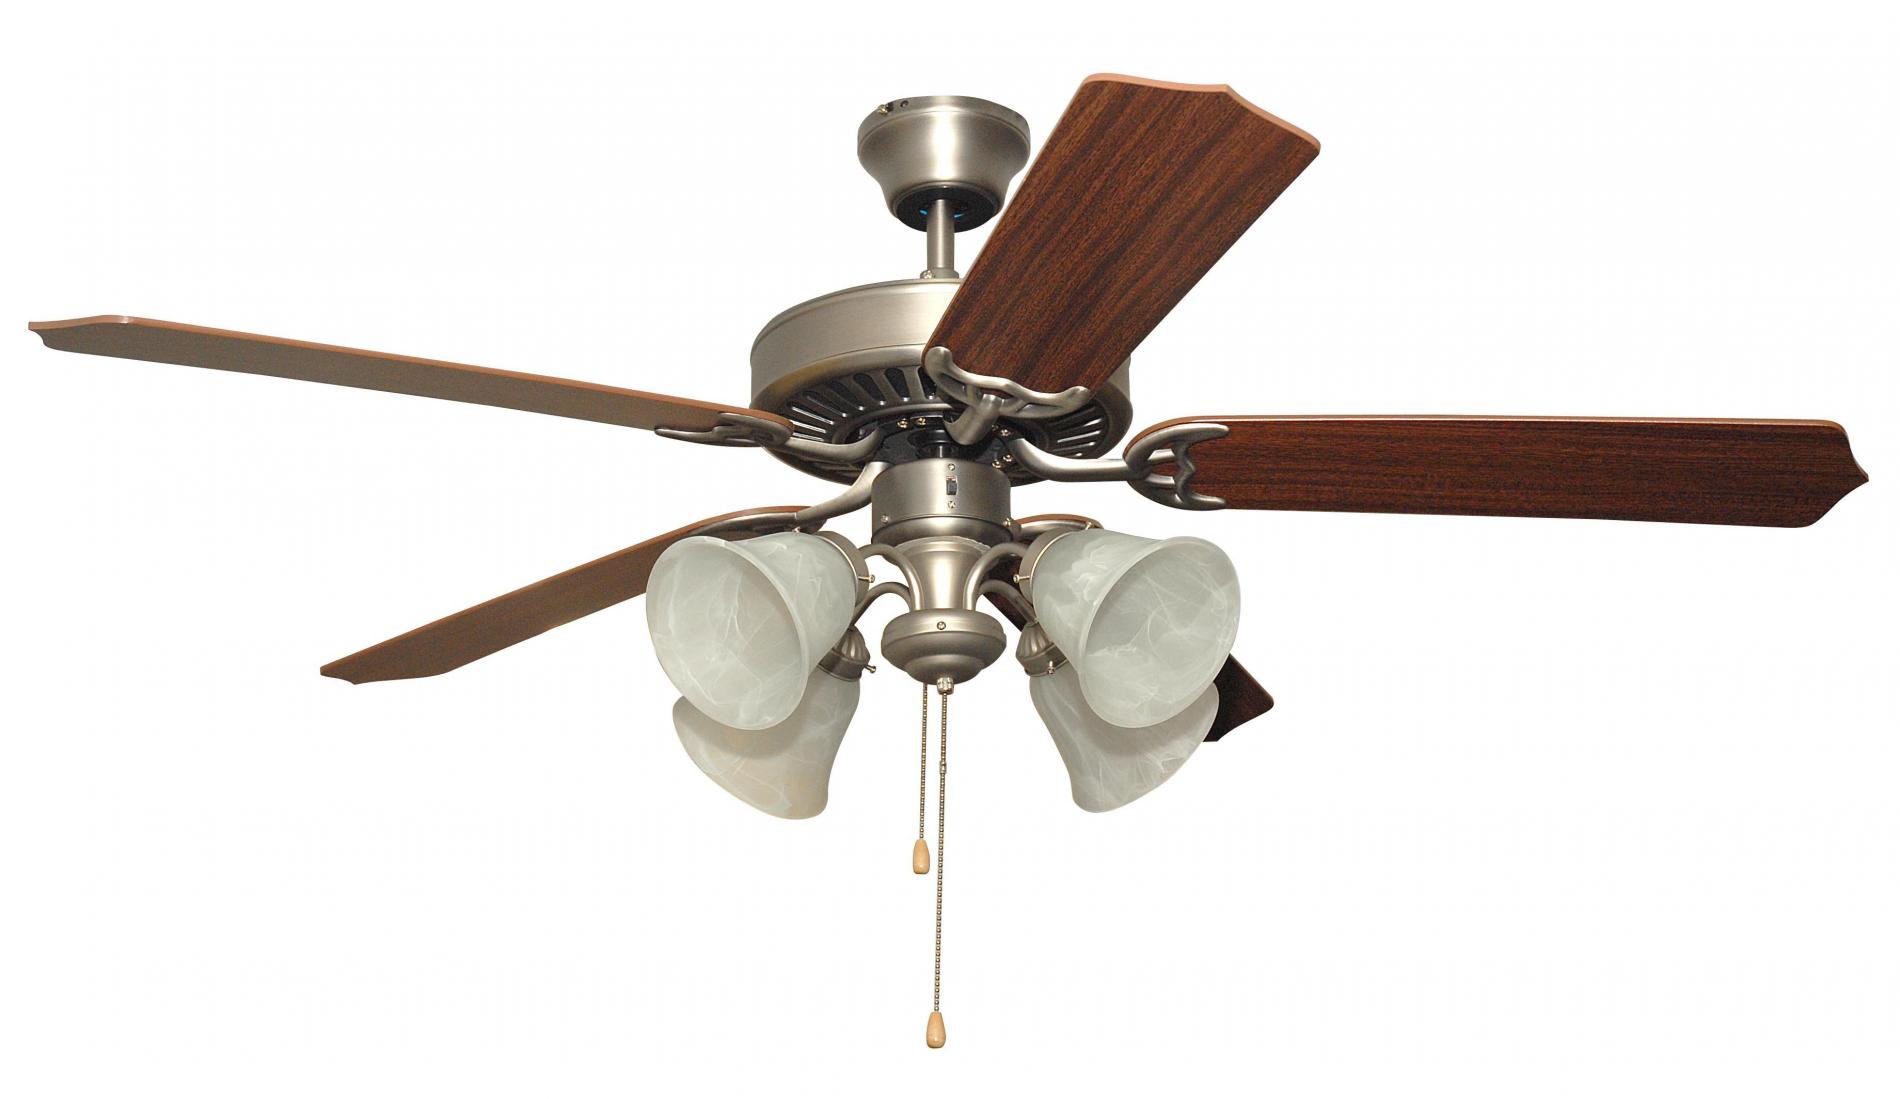 Ceiling fan light - 10 ways to light up your space ...